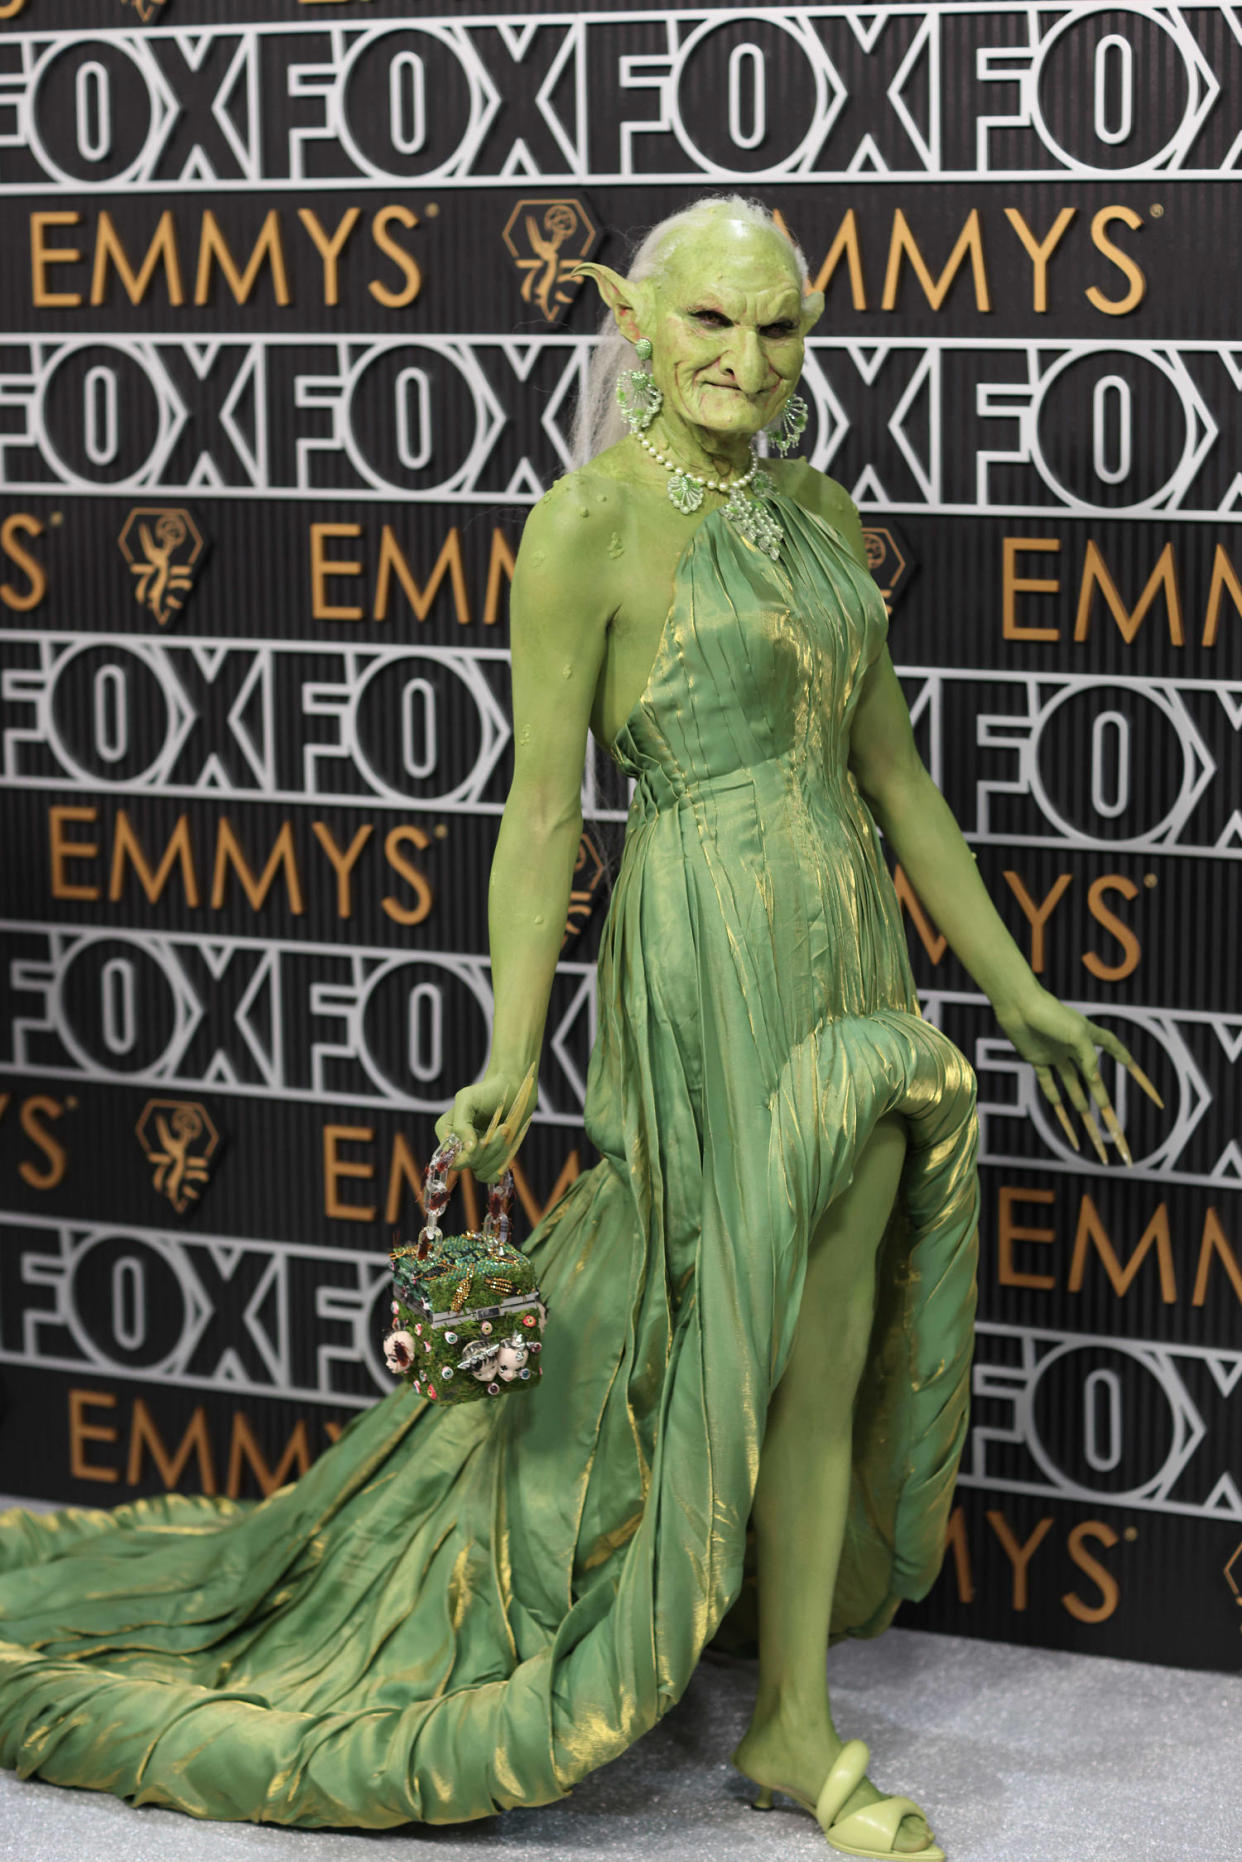 Celeb behind the green goblin look at the Emmys revealed ‘I wanted to